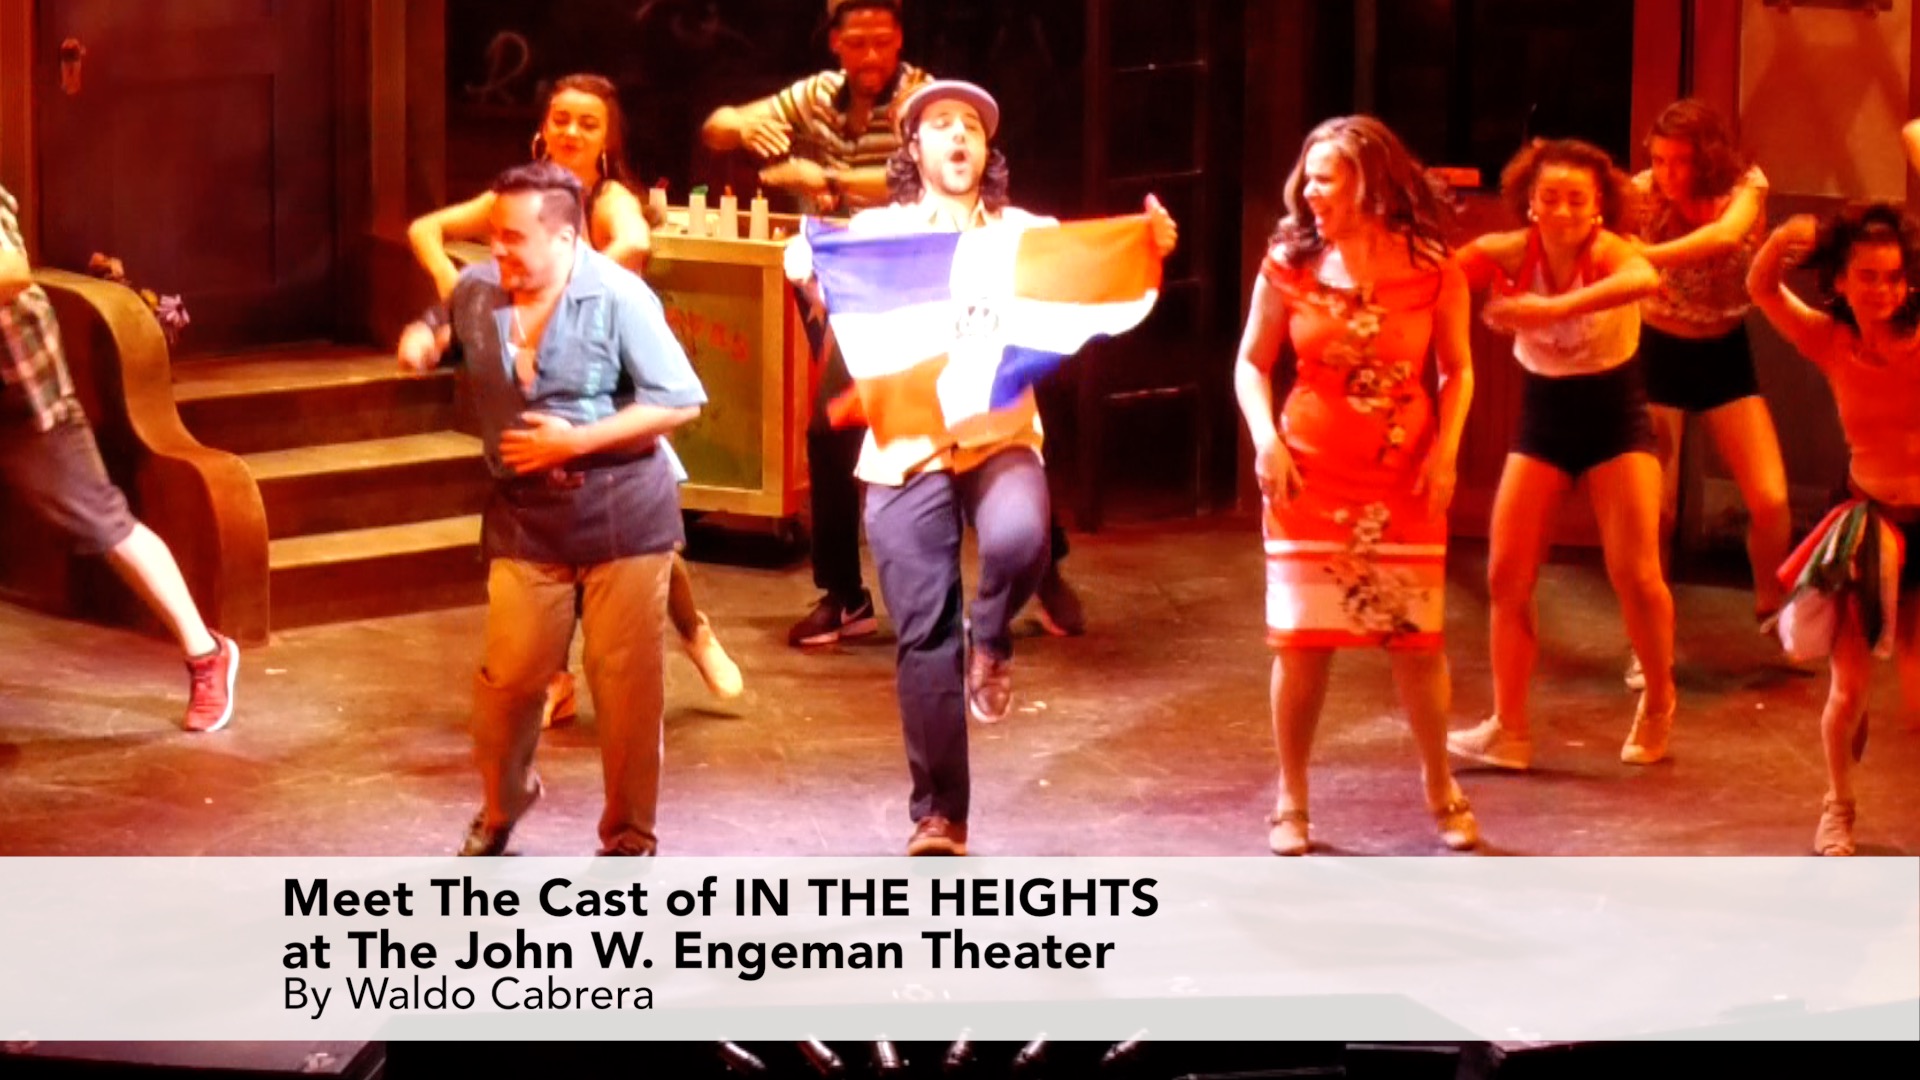 Meet The Cast of IN THE HEIGHTS at The John W Engeman Theater